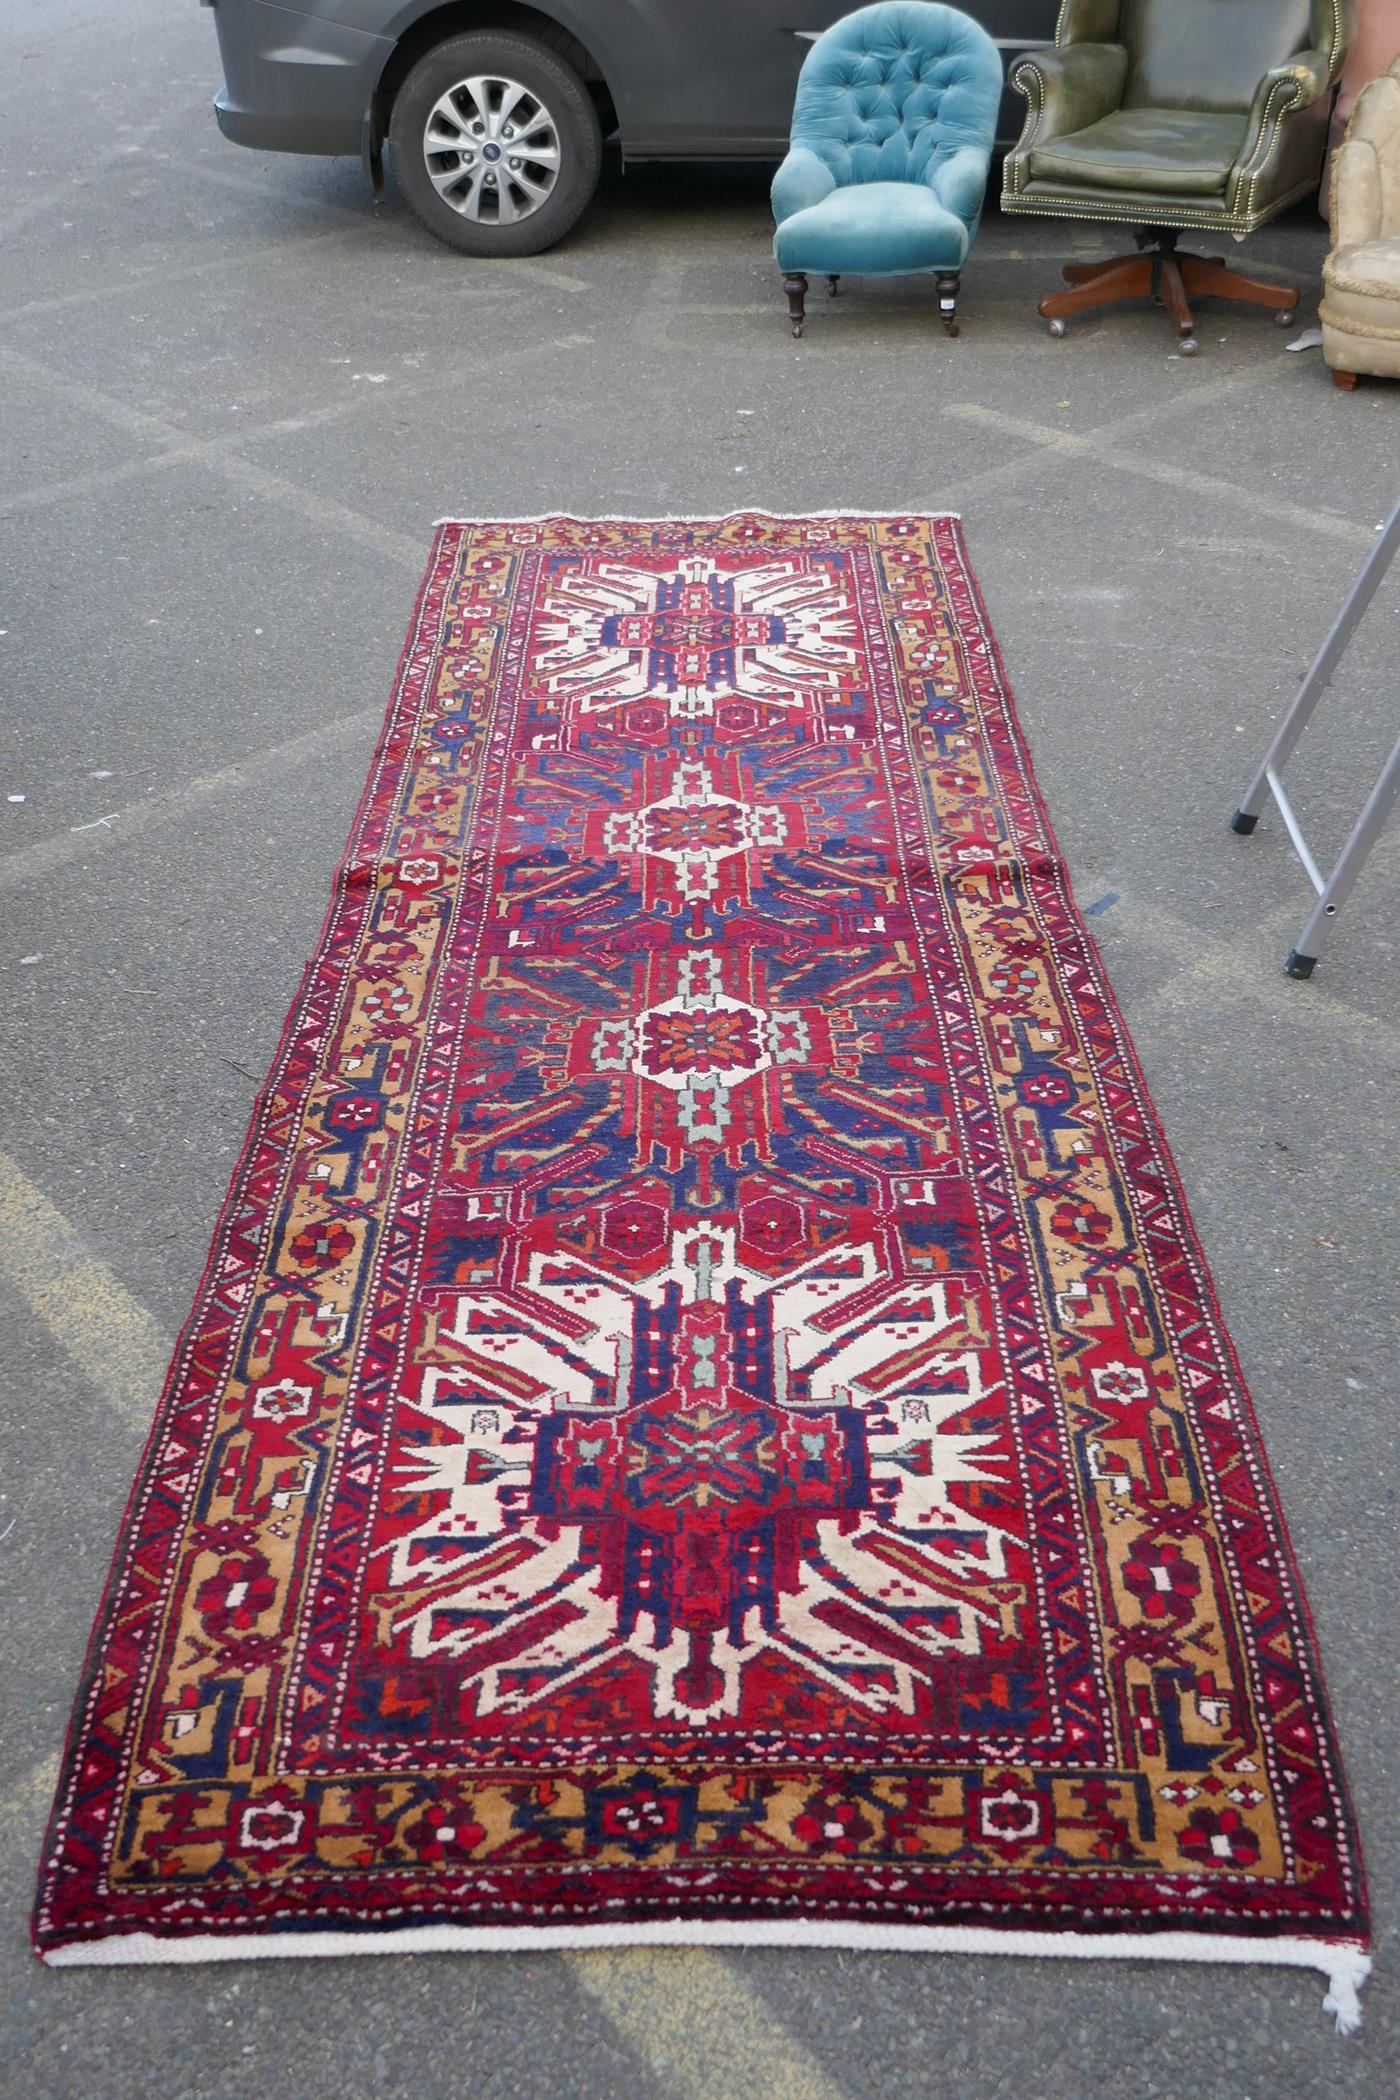 A Persian red ground Heritz runner with a starburst medallion design, 46" x 131" - Image 3 of 8